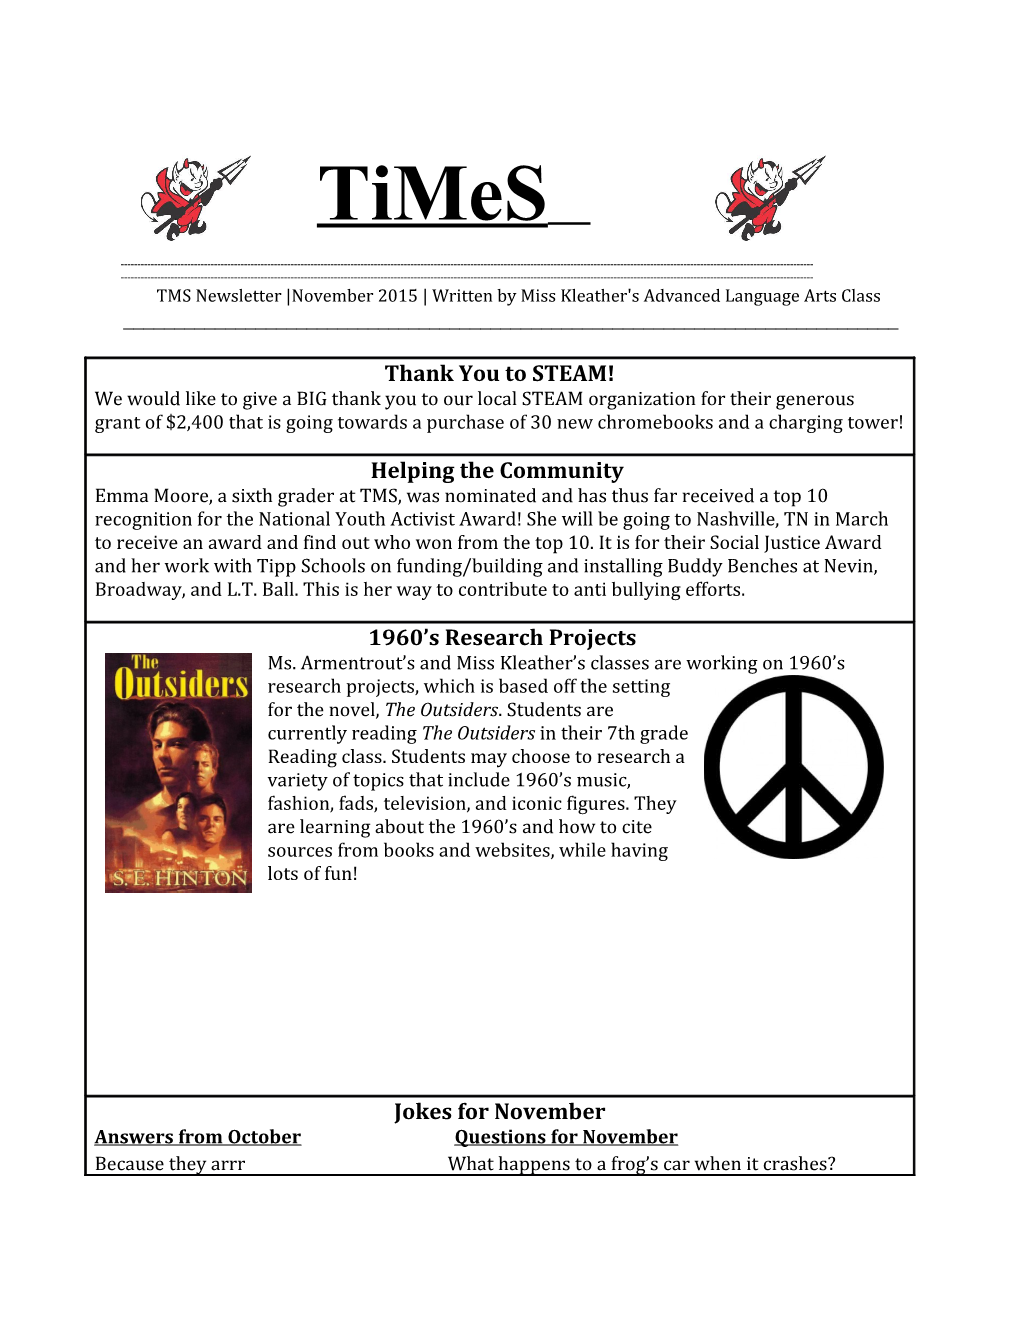 TMS Newsletter November 2015 Written by Miss Kleather's Advanced Language Arts Class